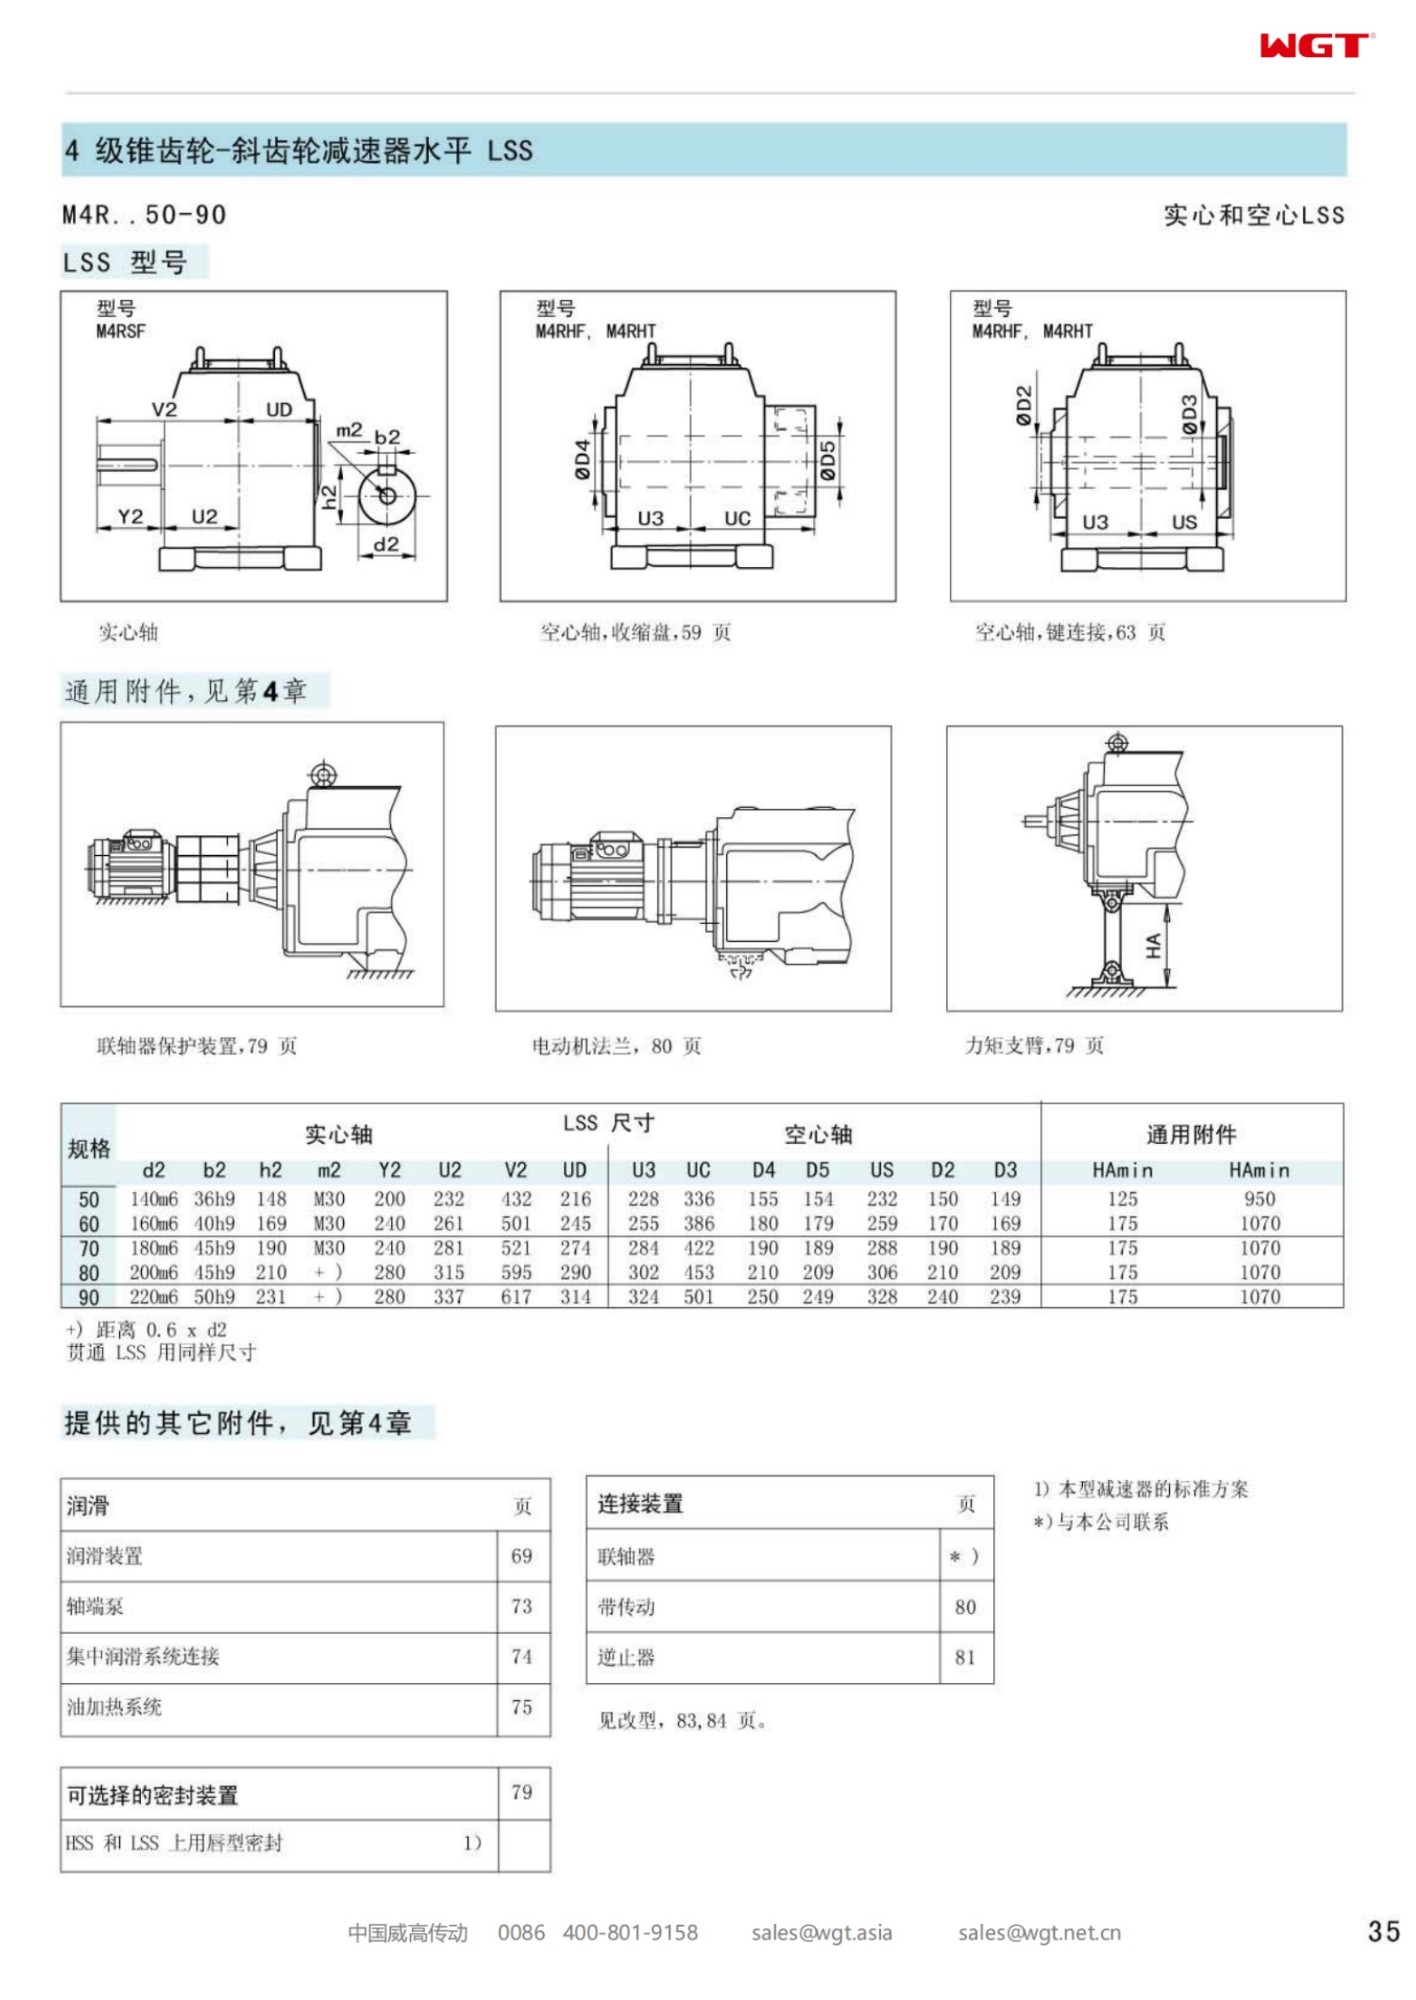 M4RHT60 Replace_SEW_M_Series Gearbox 